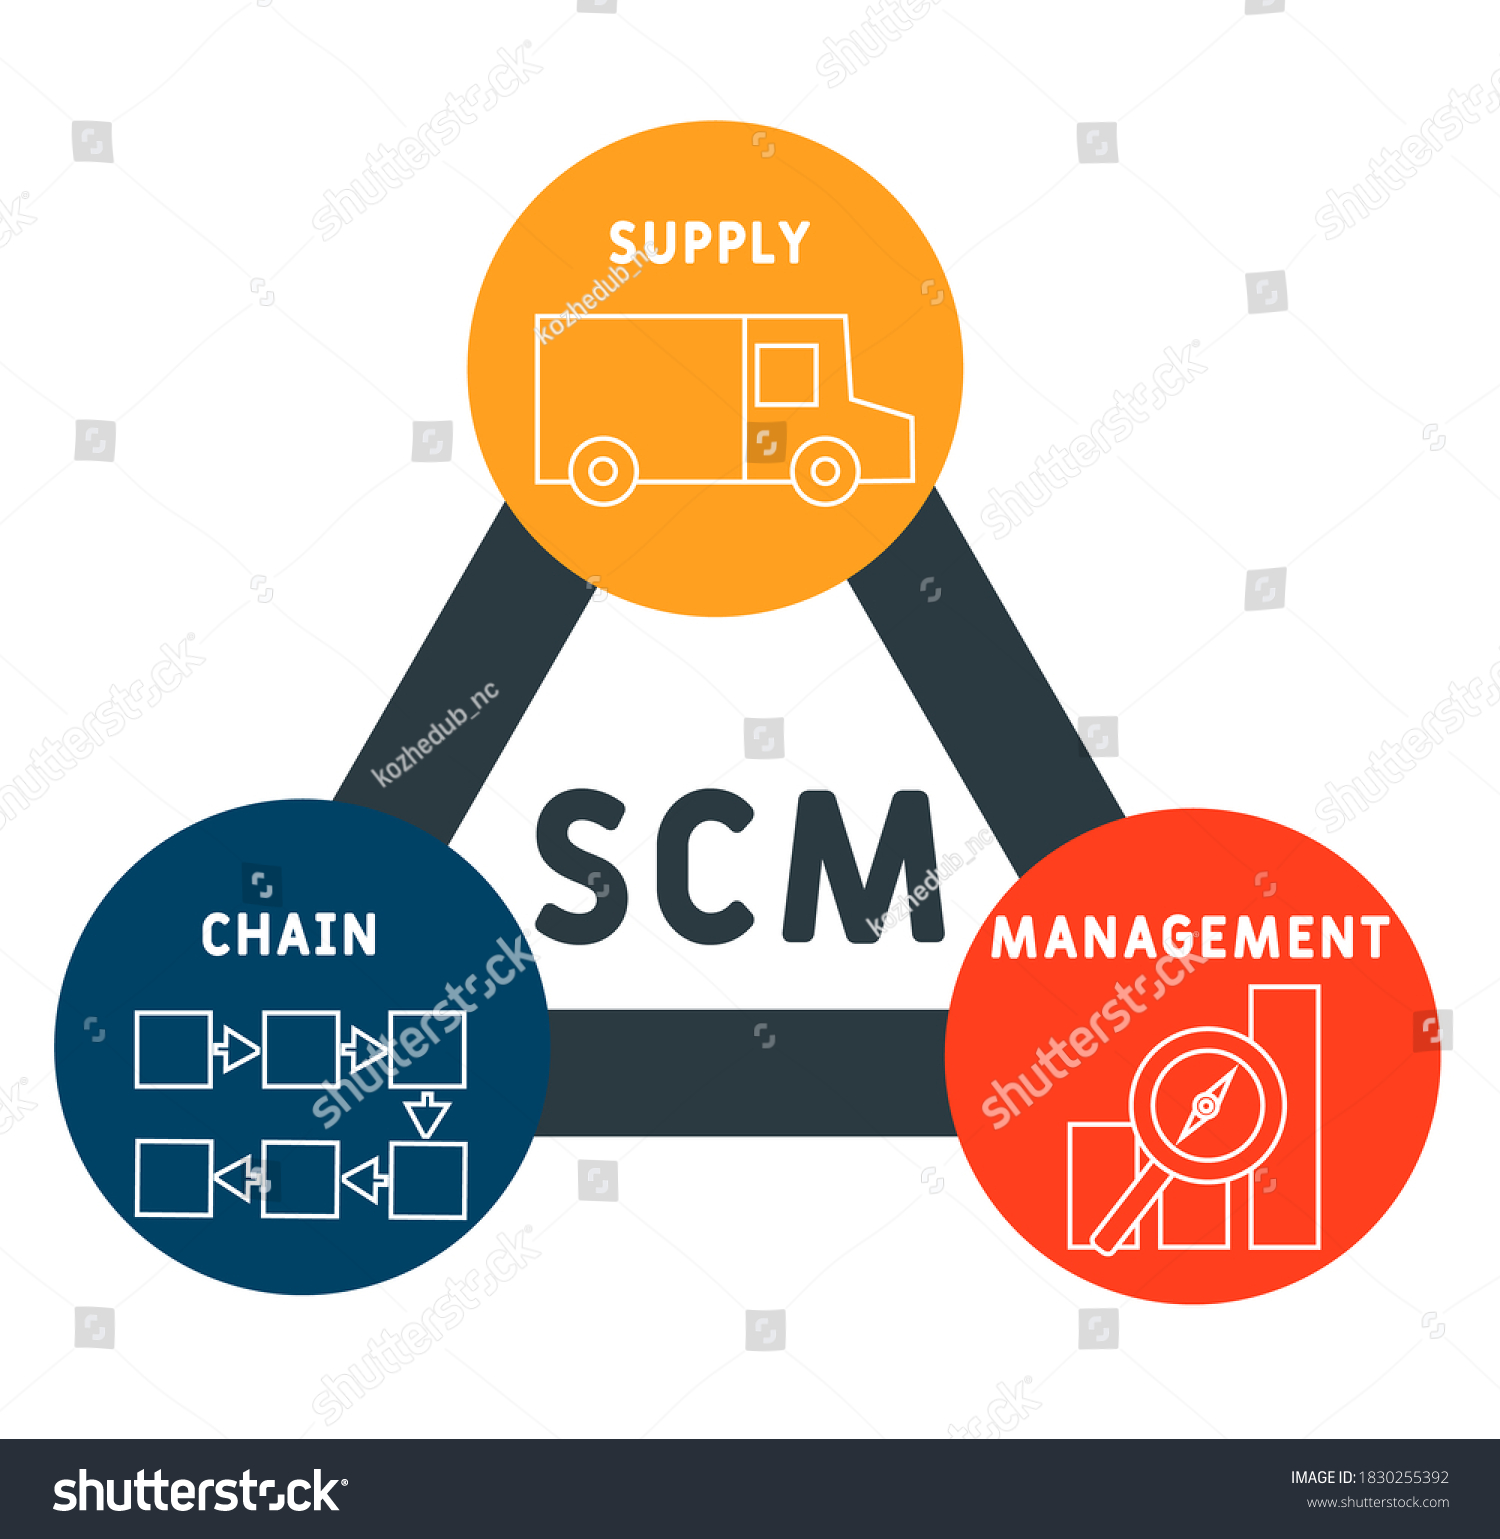 Scm Supply Chain Management Acronym Business Stock Vector Royalty Free 1830255392 Shutterstock 4701